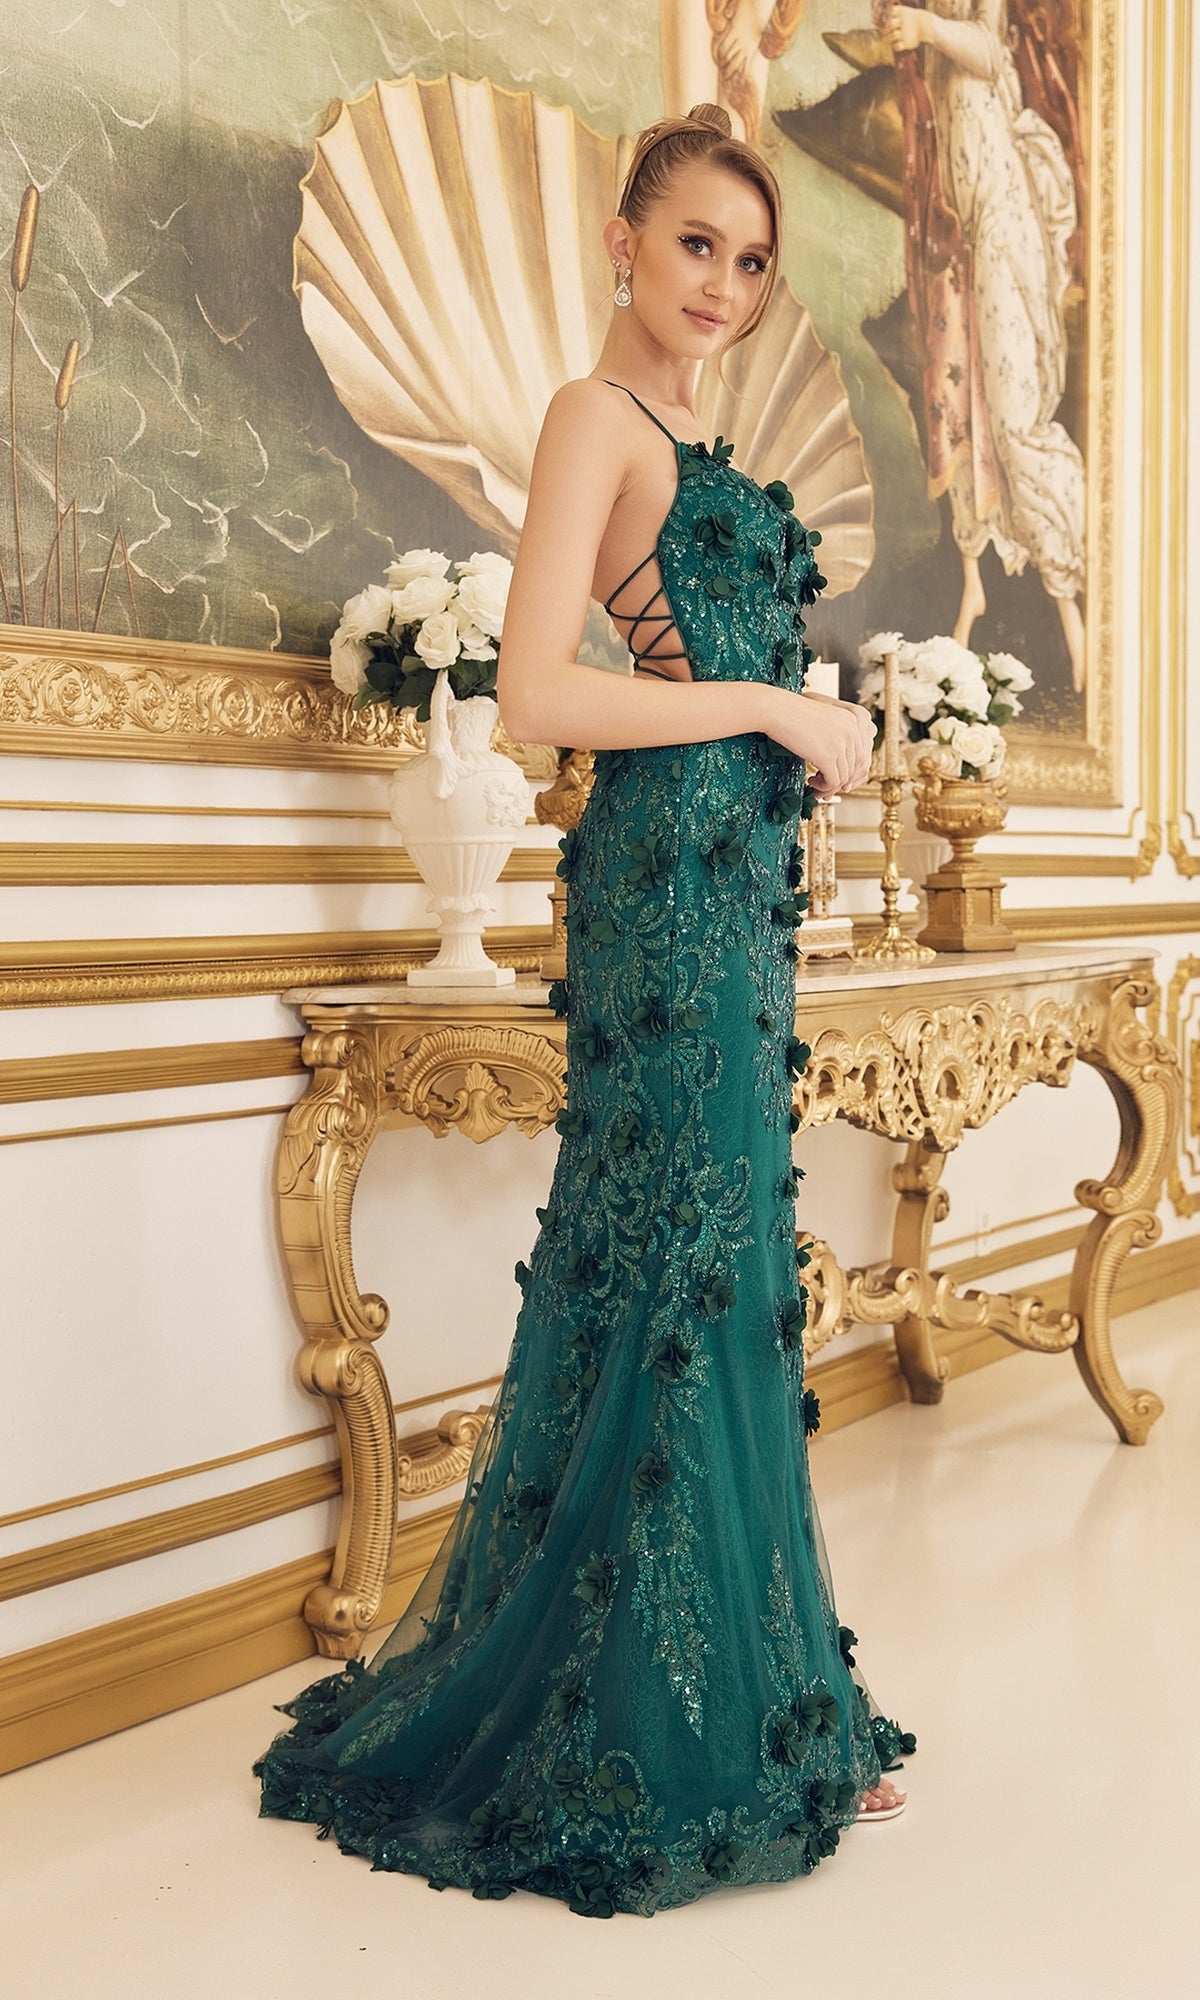 Backless Emerald Green Prom Dress with 3-D Flowers